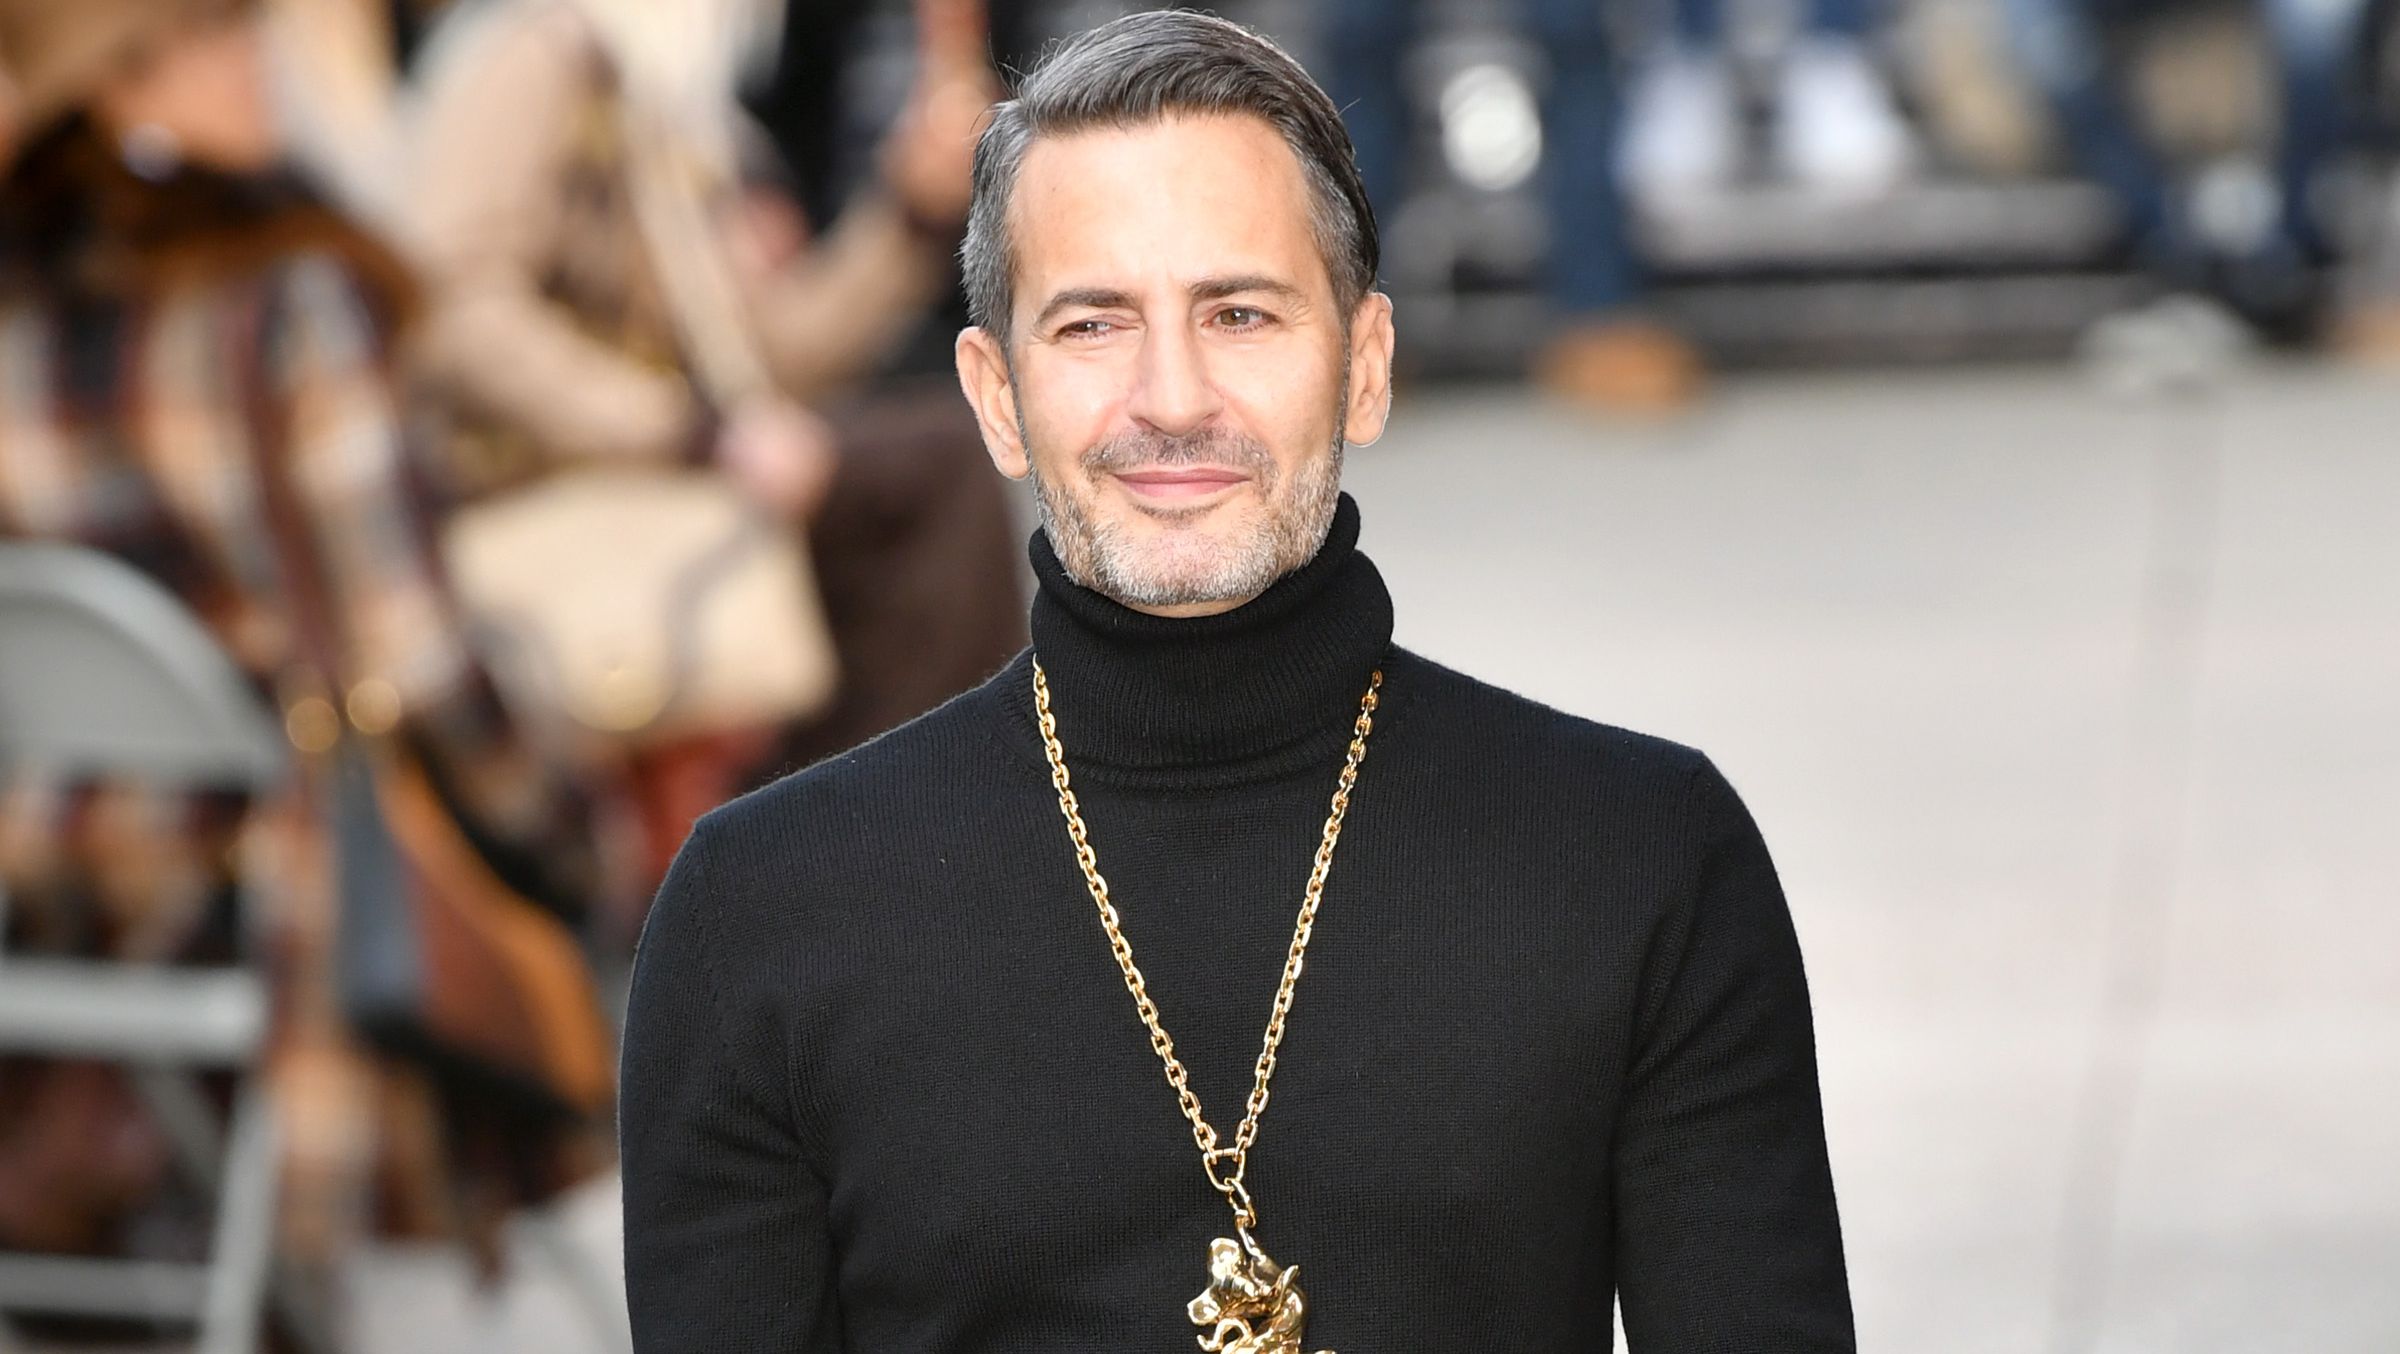 Marc Jacobs, Through The Years